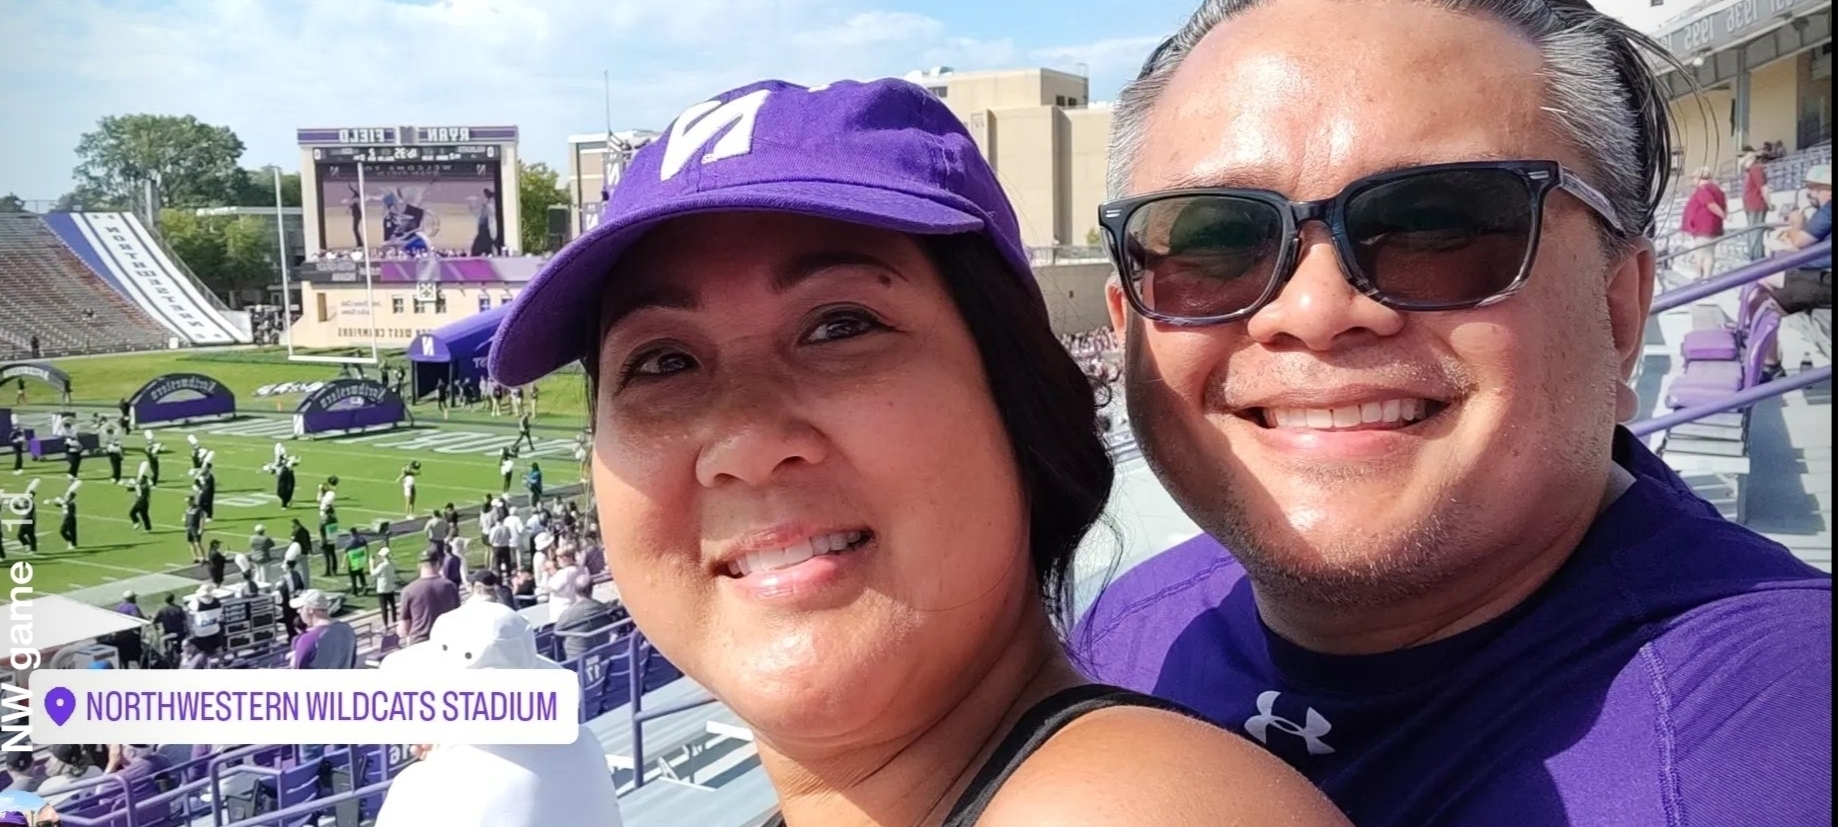 Northwestern Wildcats - NCAA Football vs Southern Illinois University at Carbondale